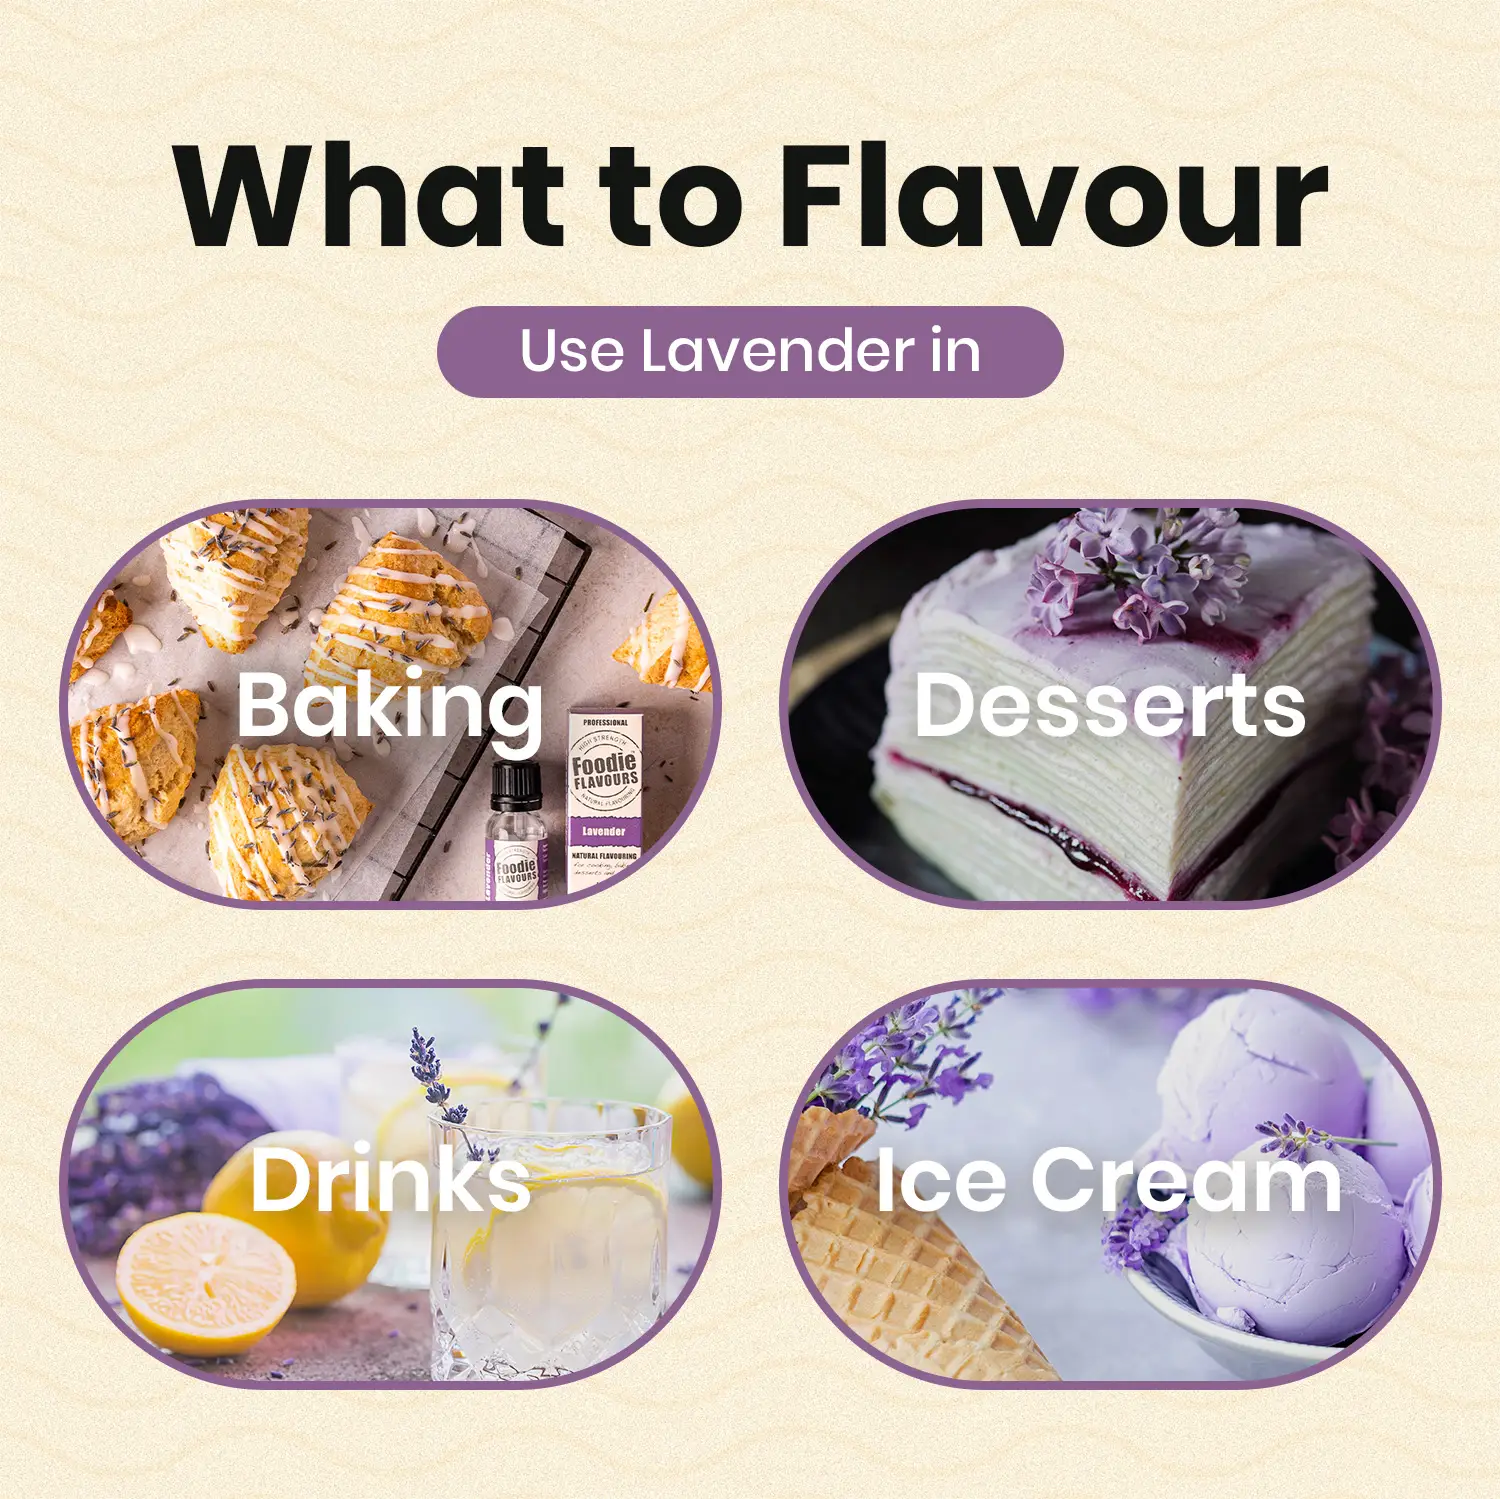 Lavender Natural Flavouring - What to flavour